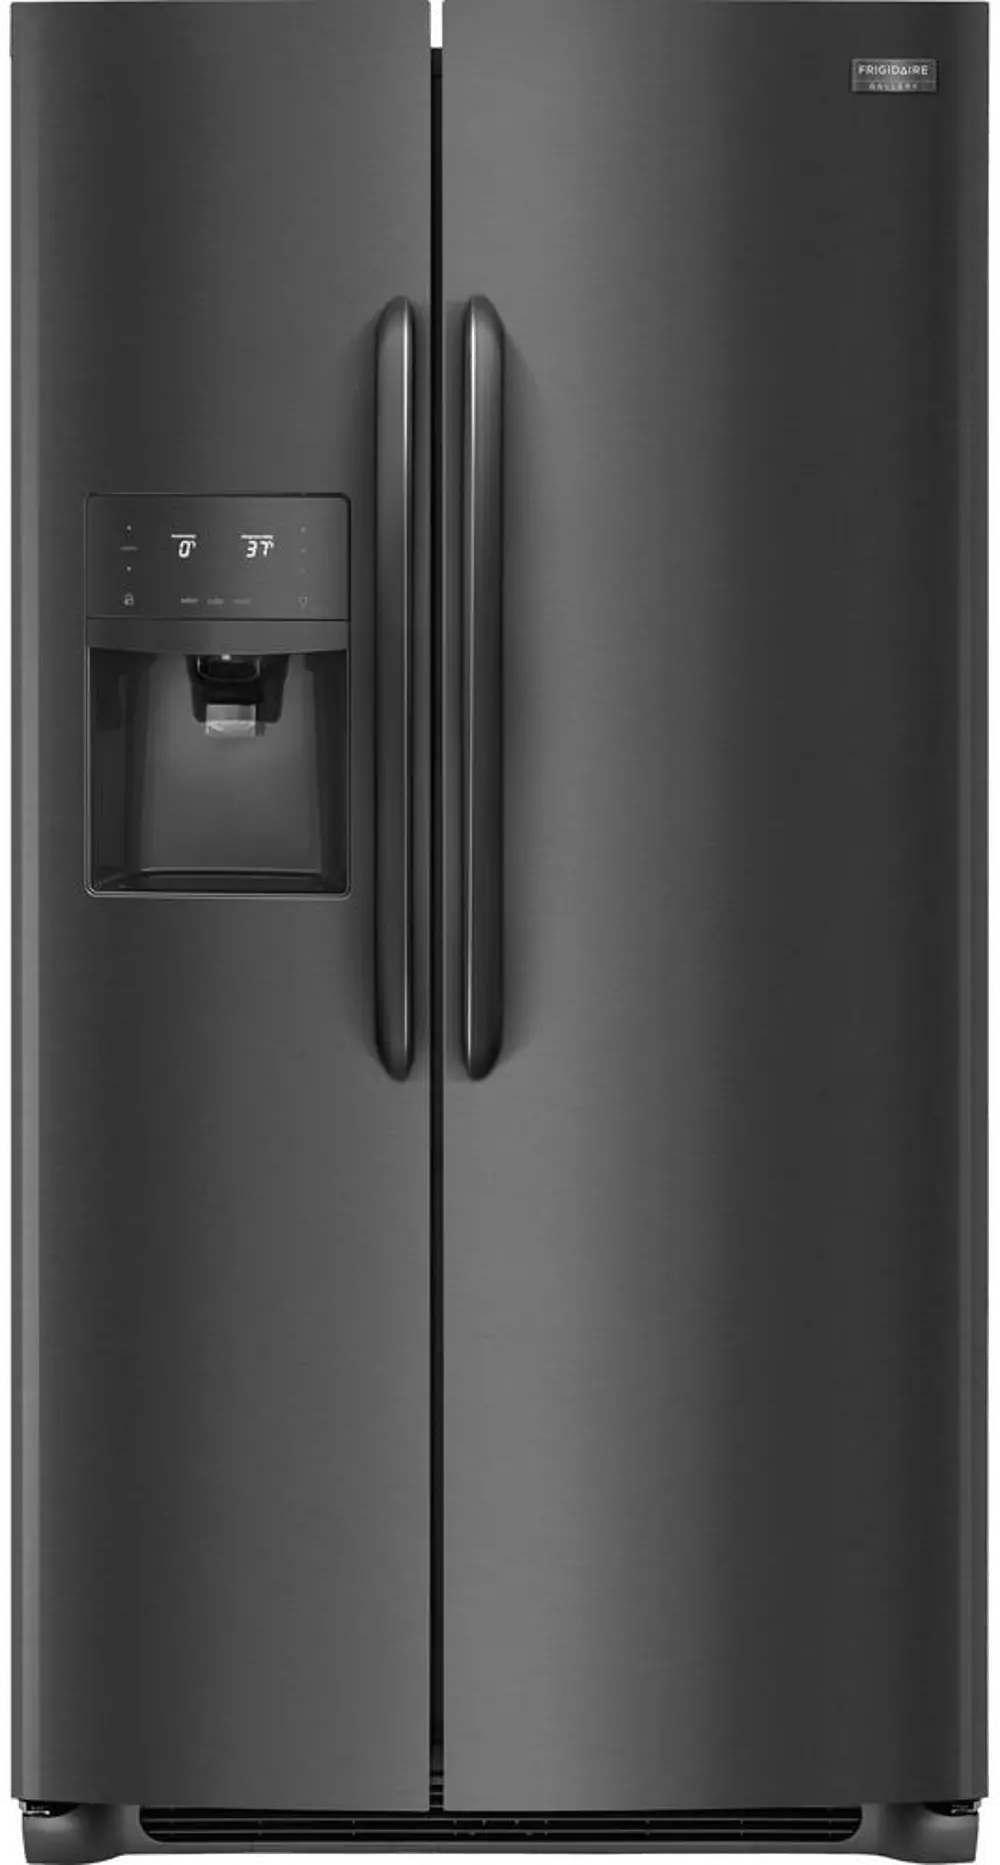 FGSS2635TD Frigidaire Gallery 25.5 cu. ft. Side by Side Refrigerator - 36 Inch Black Stainless Steel-1